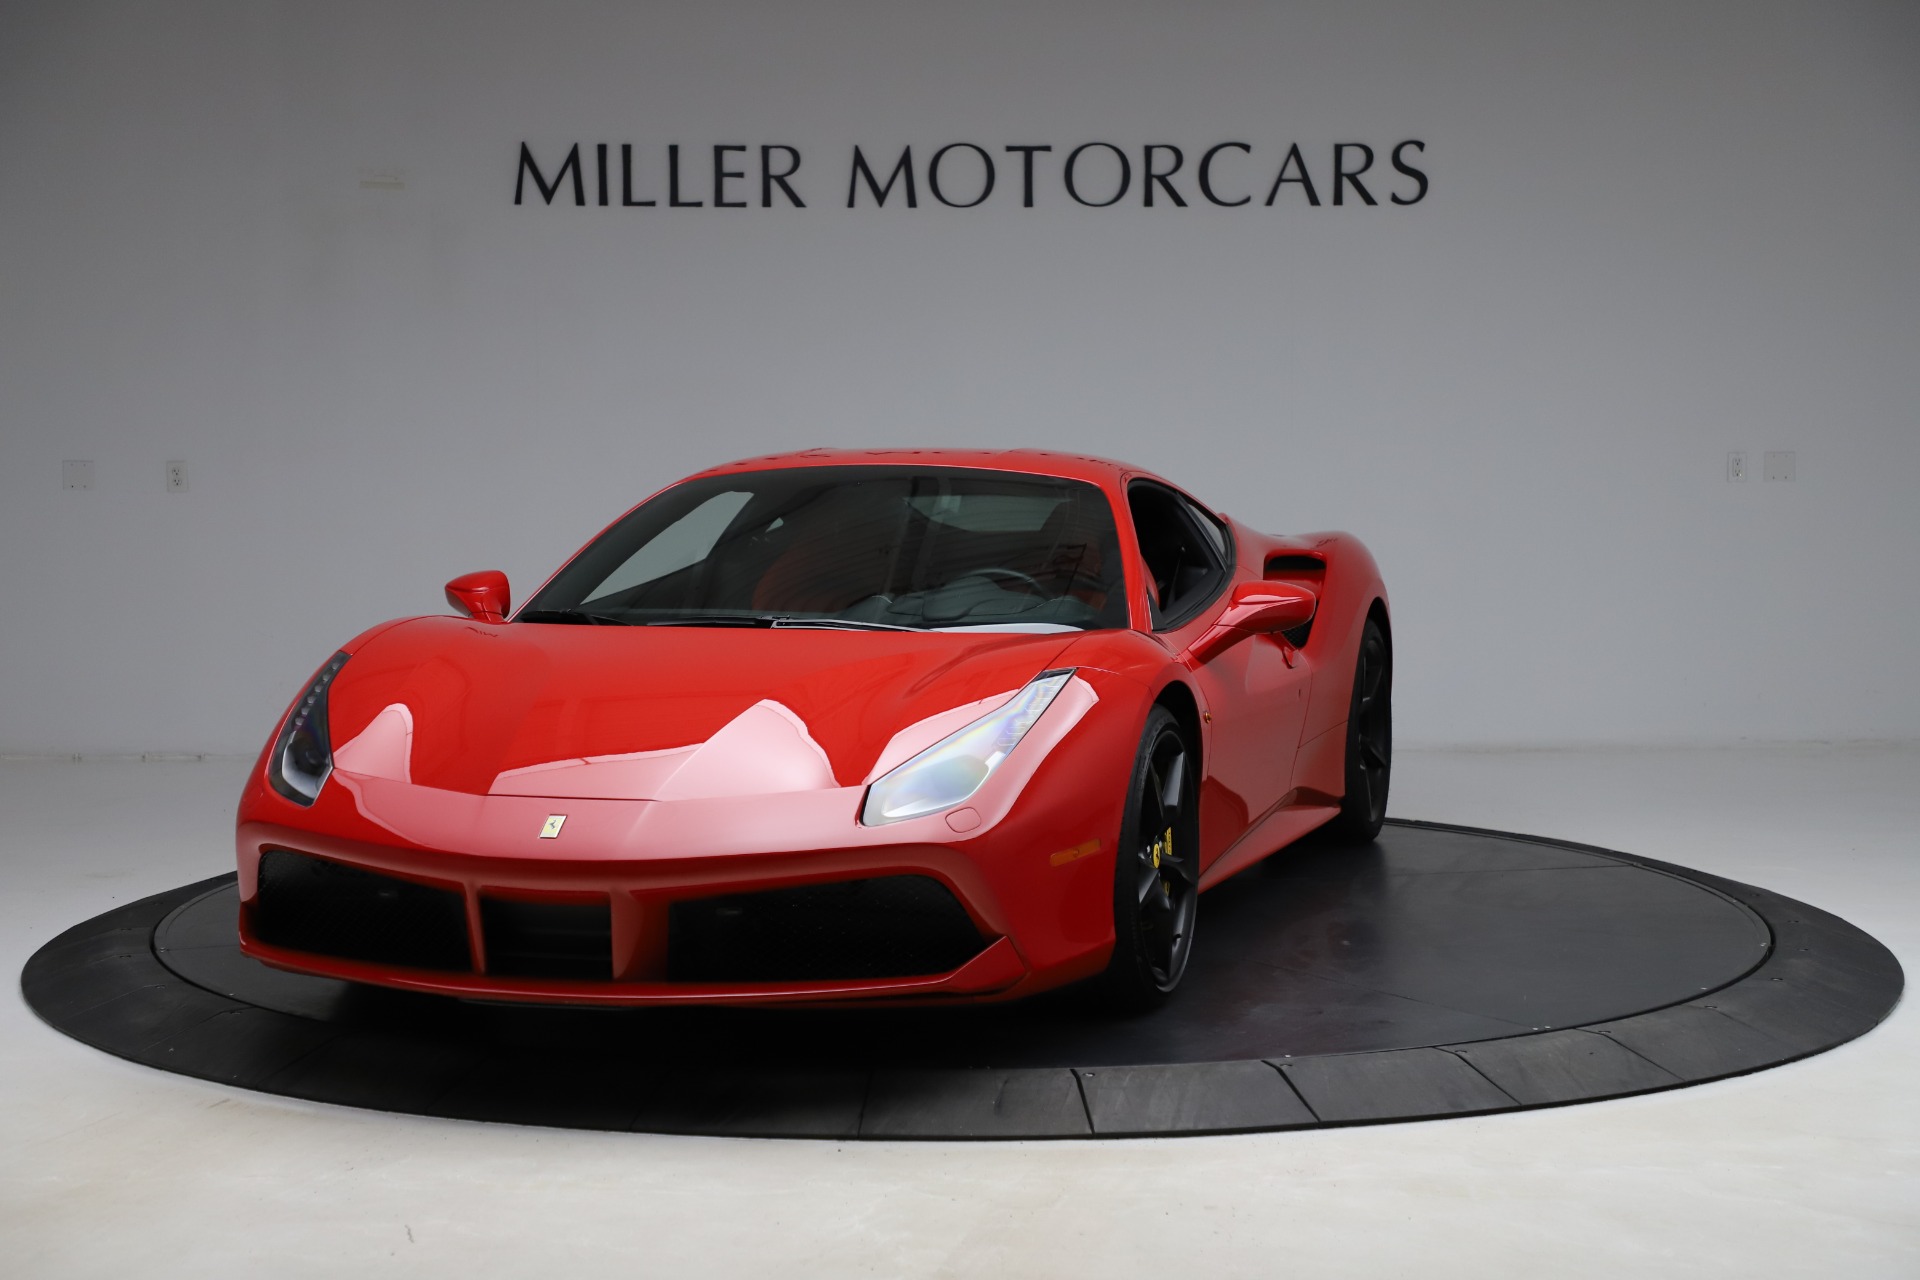 Used 2018 Ferrari 488 GTB for sale Sold at Pagani of Greenwich in Greenwich CT 06830 1